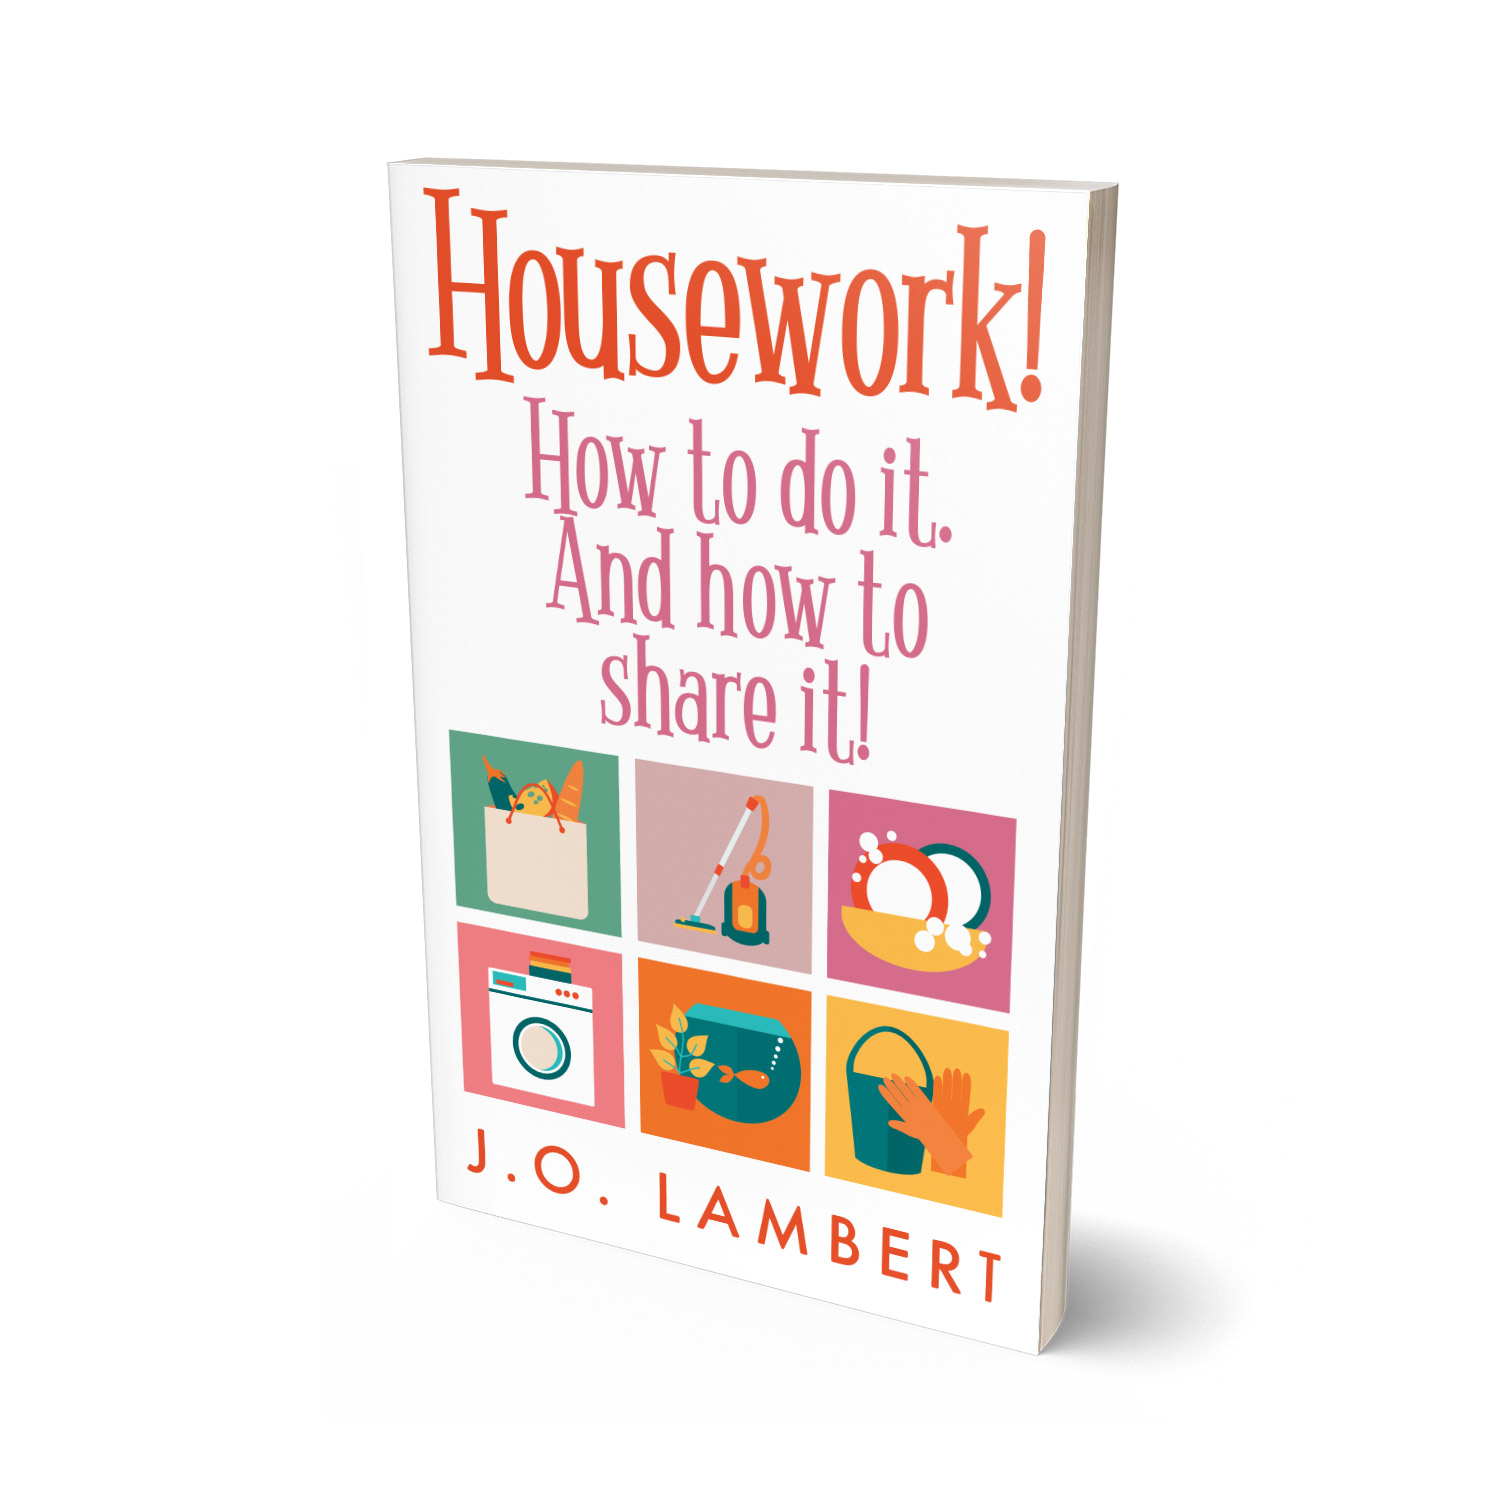 'Housework' is a compact self-help guide to safely looking after your home. The author is J. O. Lambert. The book cover and interior design is by Mark Thomas. To learn more about what Mark could do for your book, please visit coverness.com.